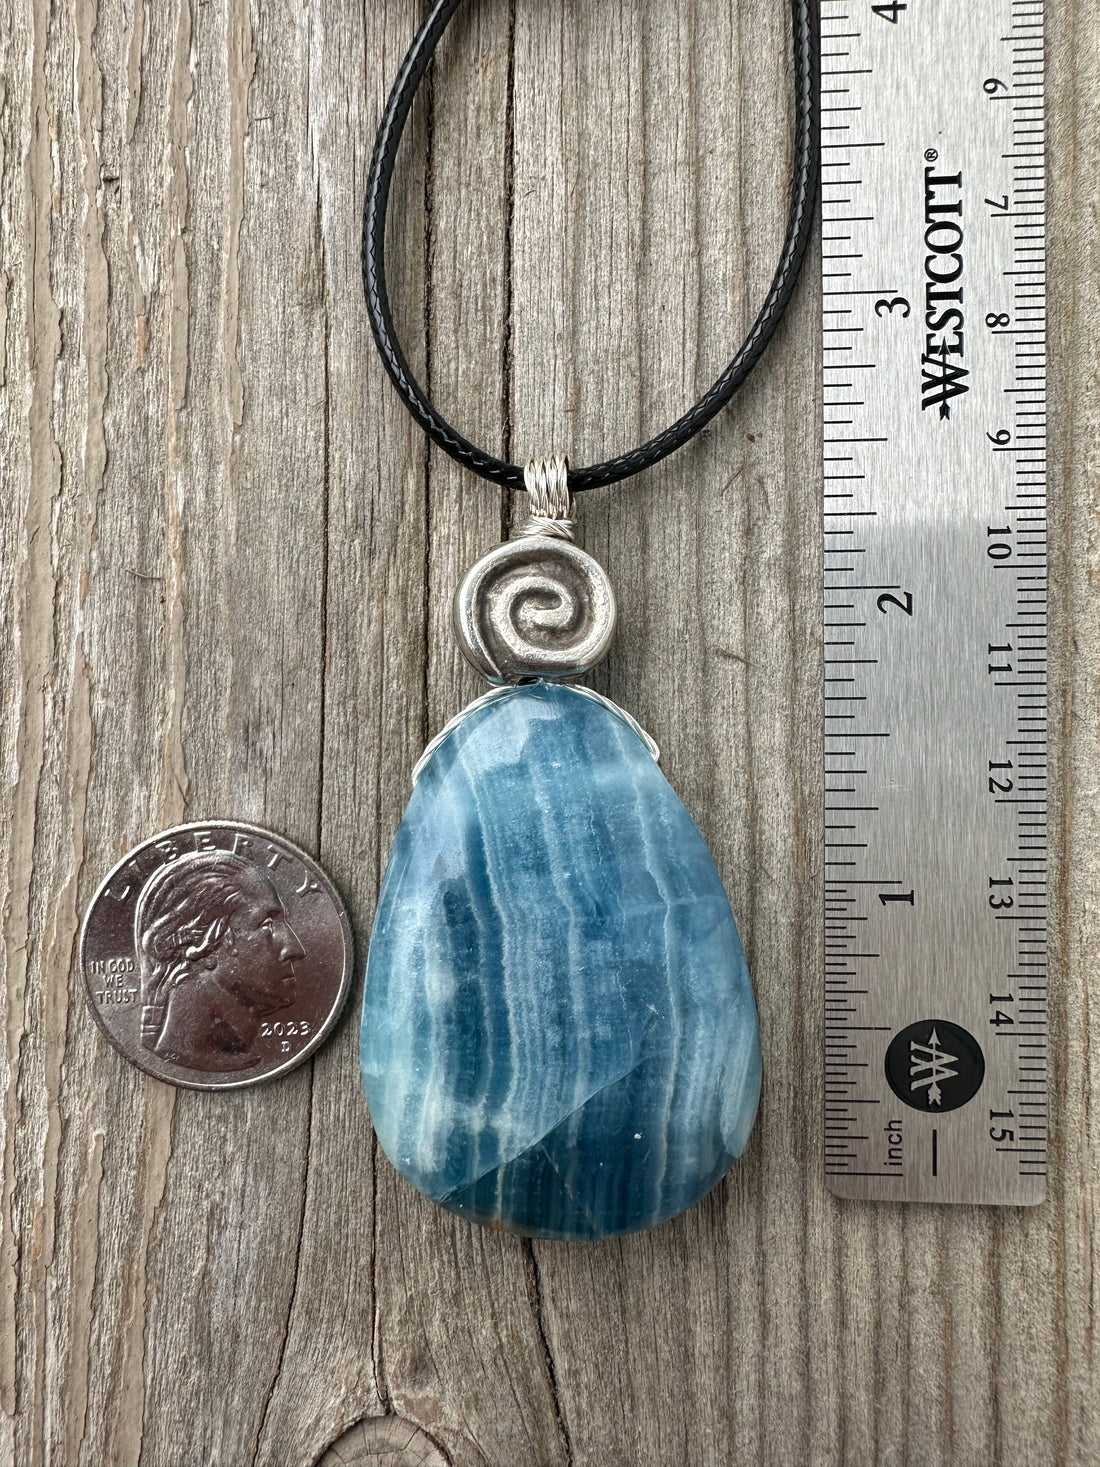 Aragonite Pendant For Grounding and Past Life Regression with Swirl for Higher Consciousness and Black Cable